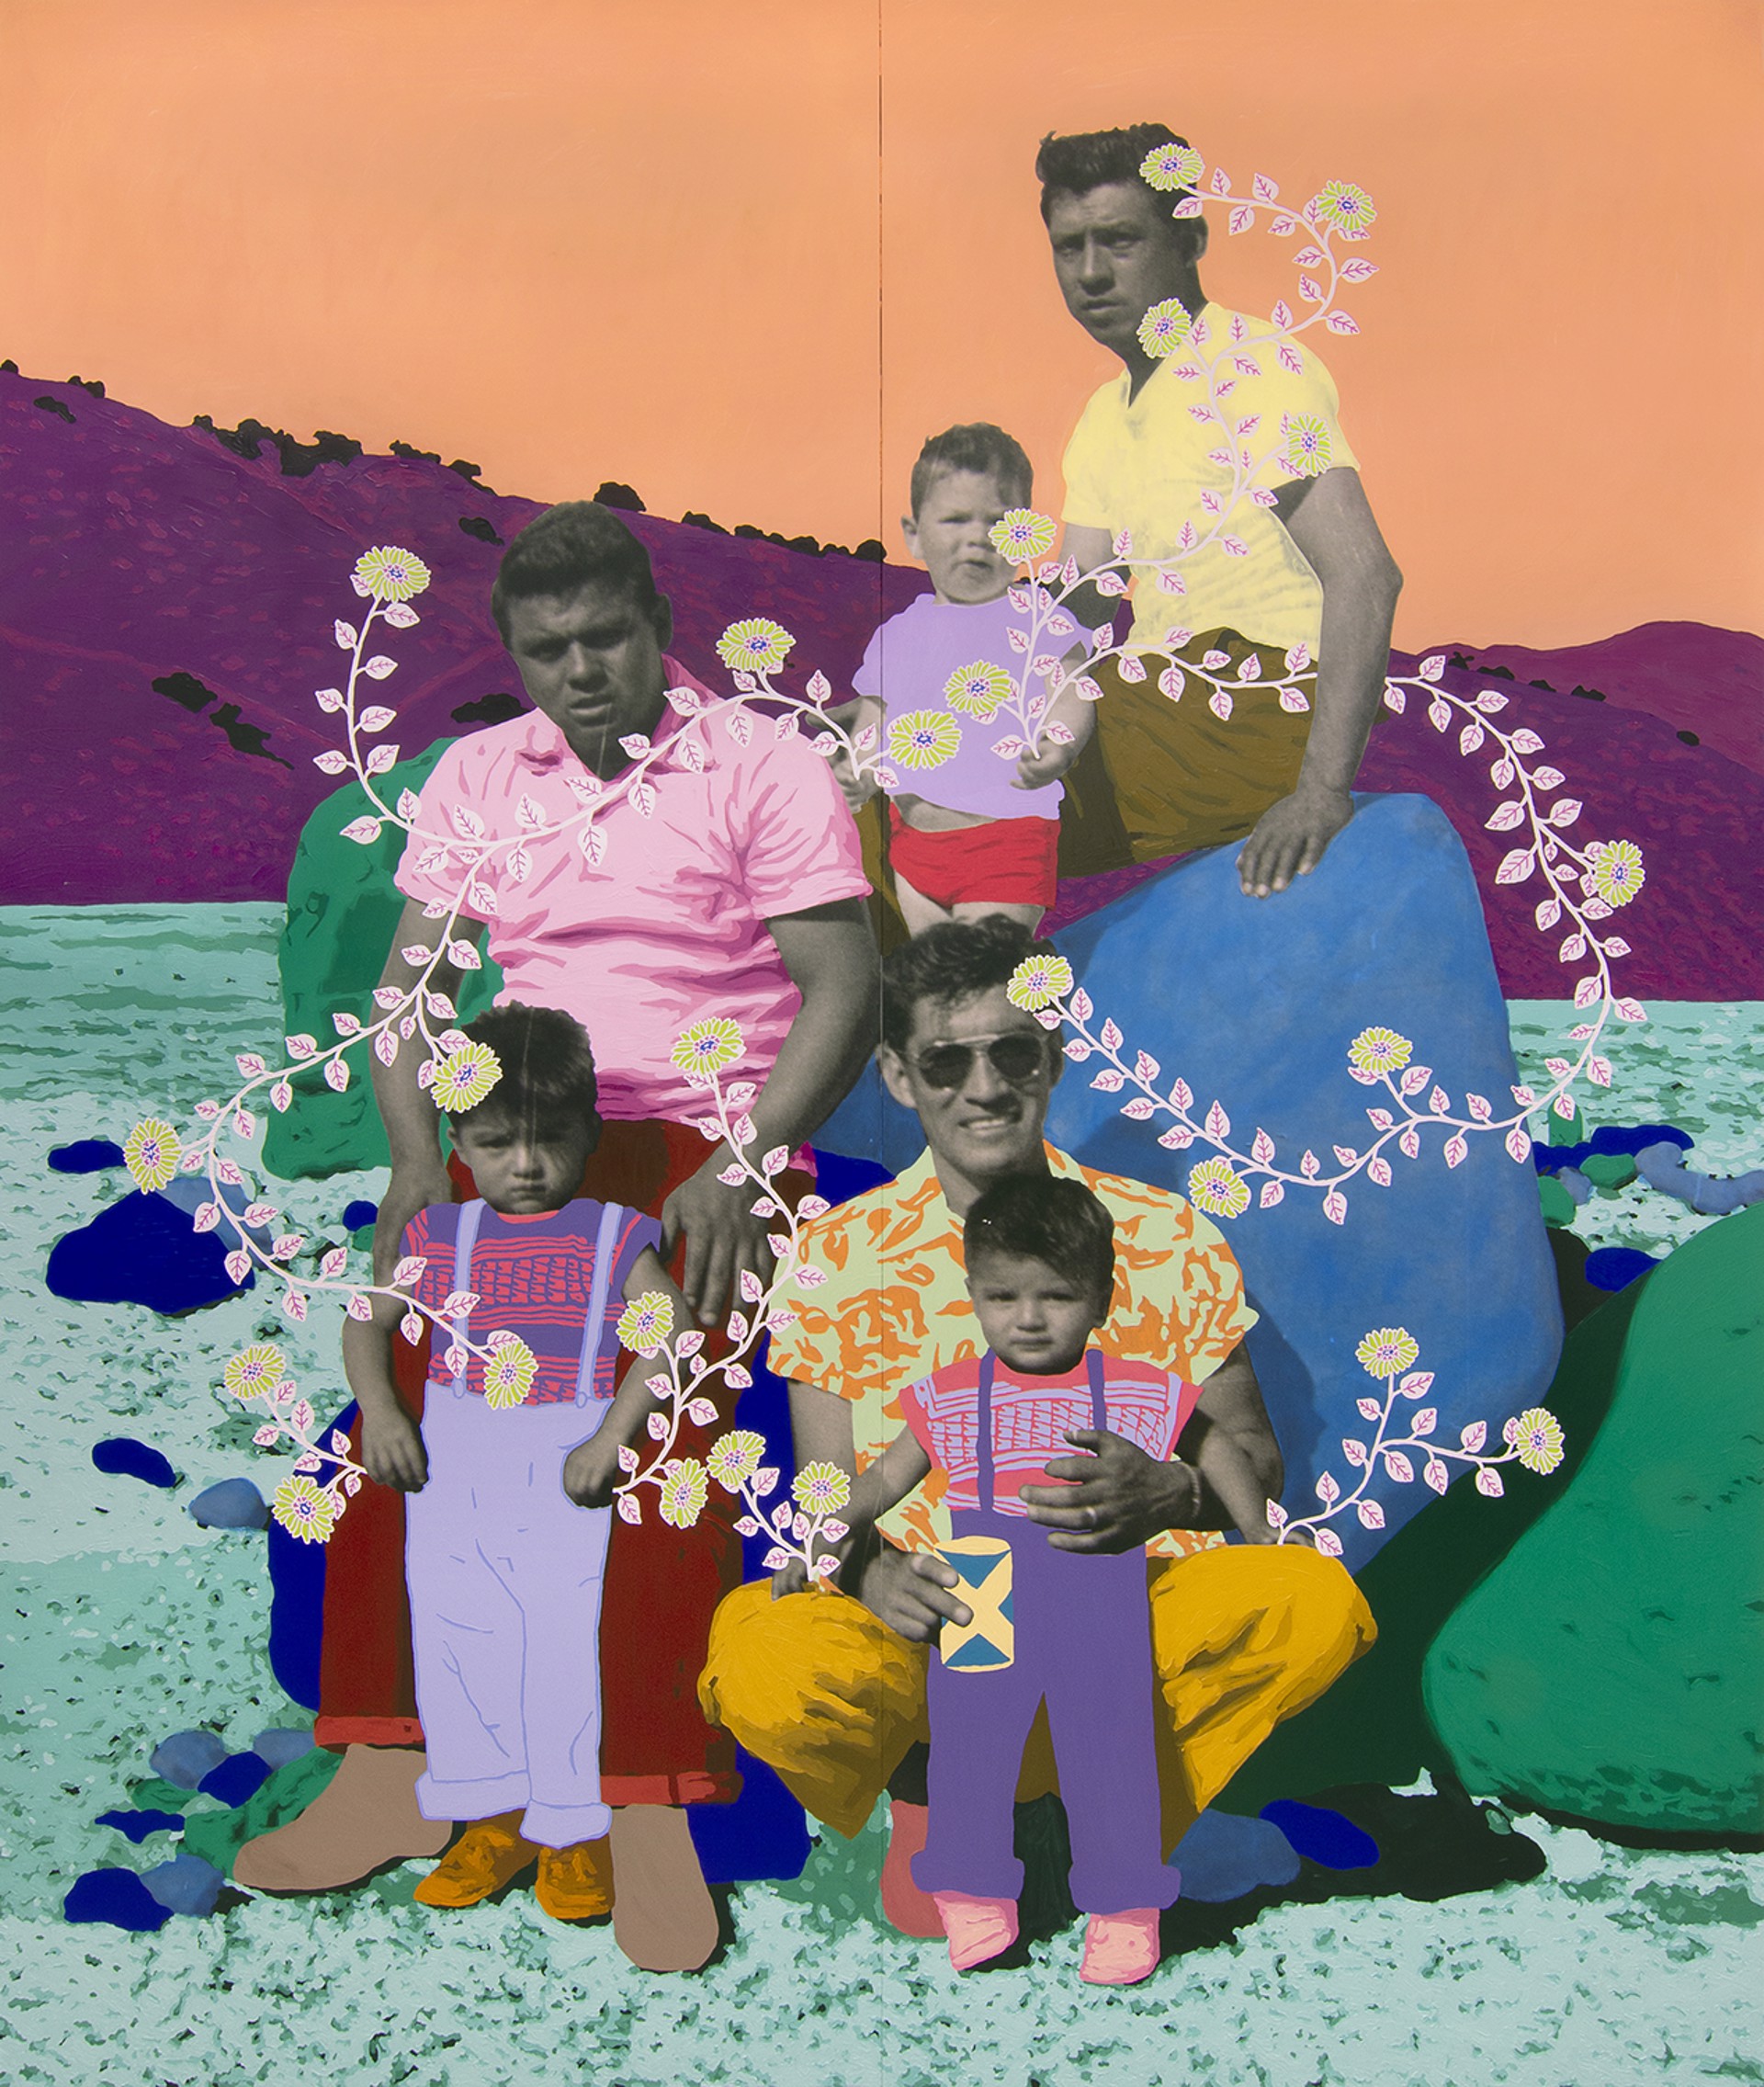 Untitled (Fathers and Sons in the Desert with Rocks) by Daisy Patton